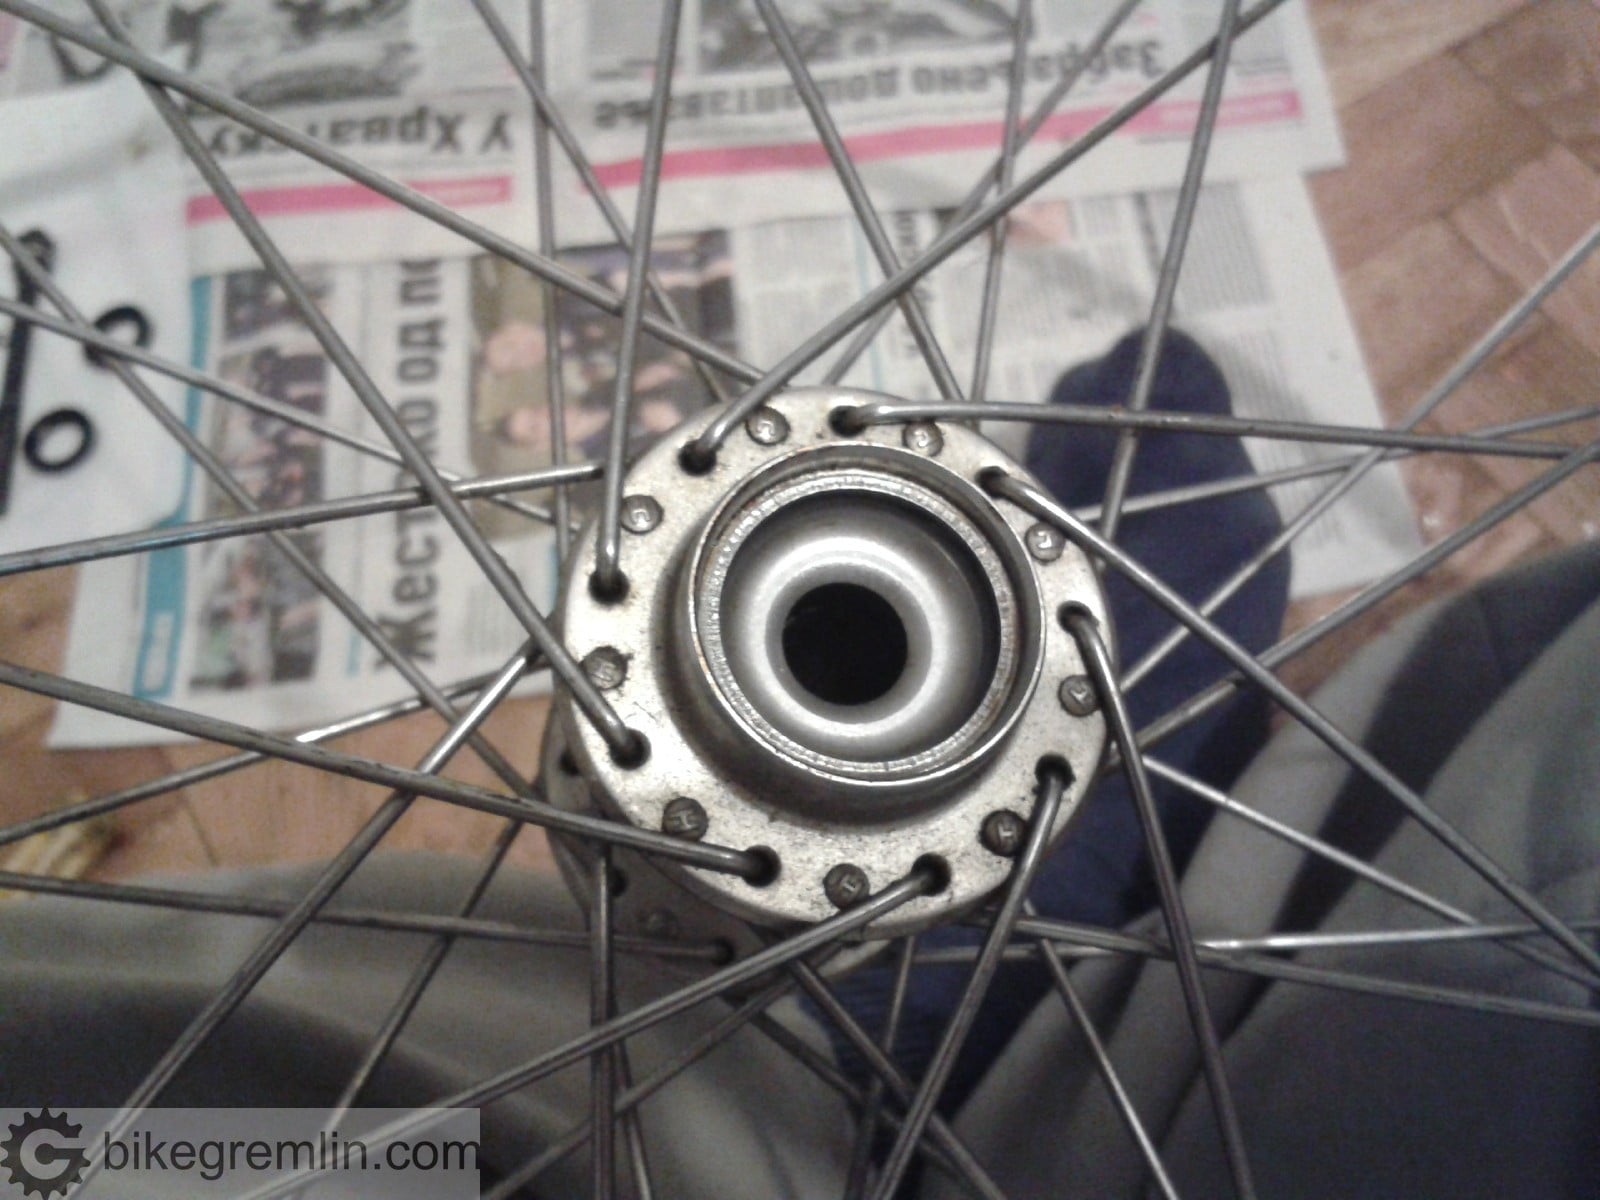 Clean, spotless cup - old Shimano quality :)